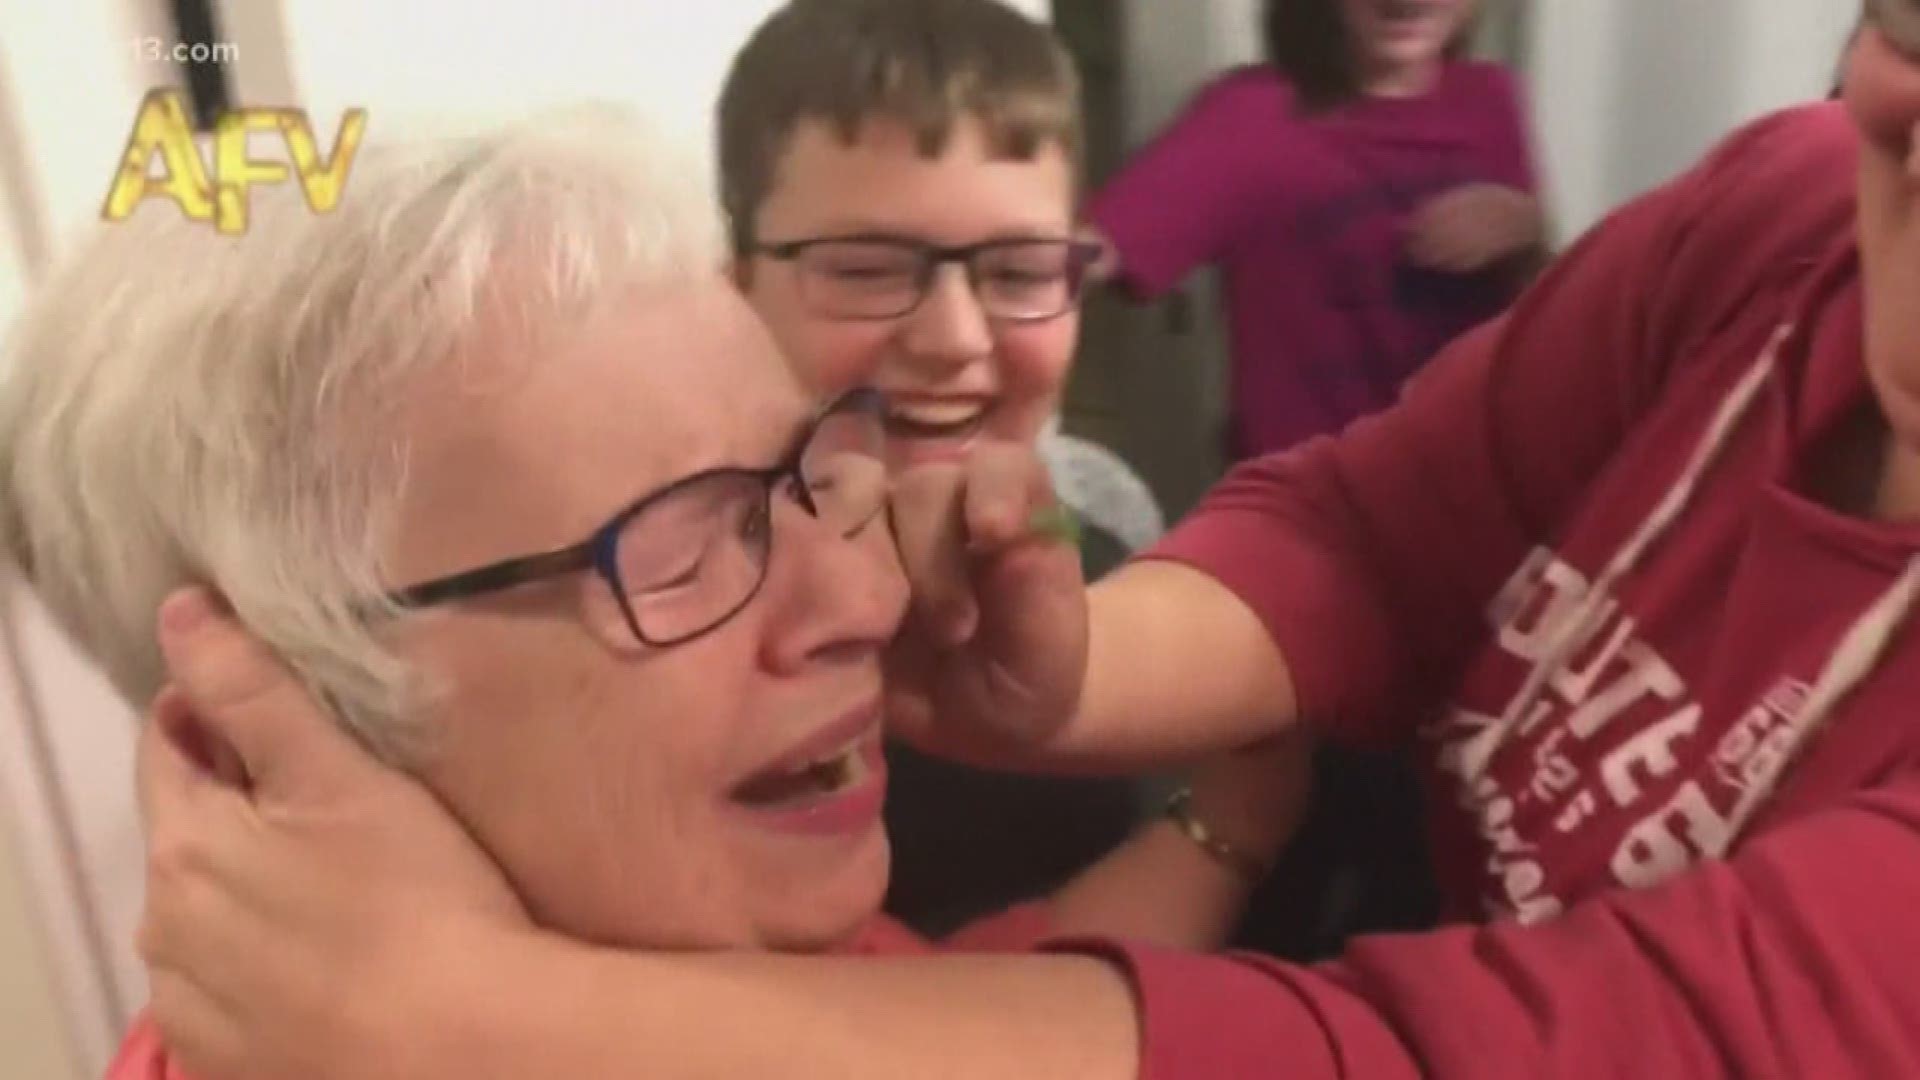 West Michigan family wins $10k prize from America's Funniest Home videos